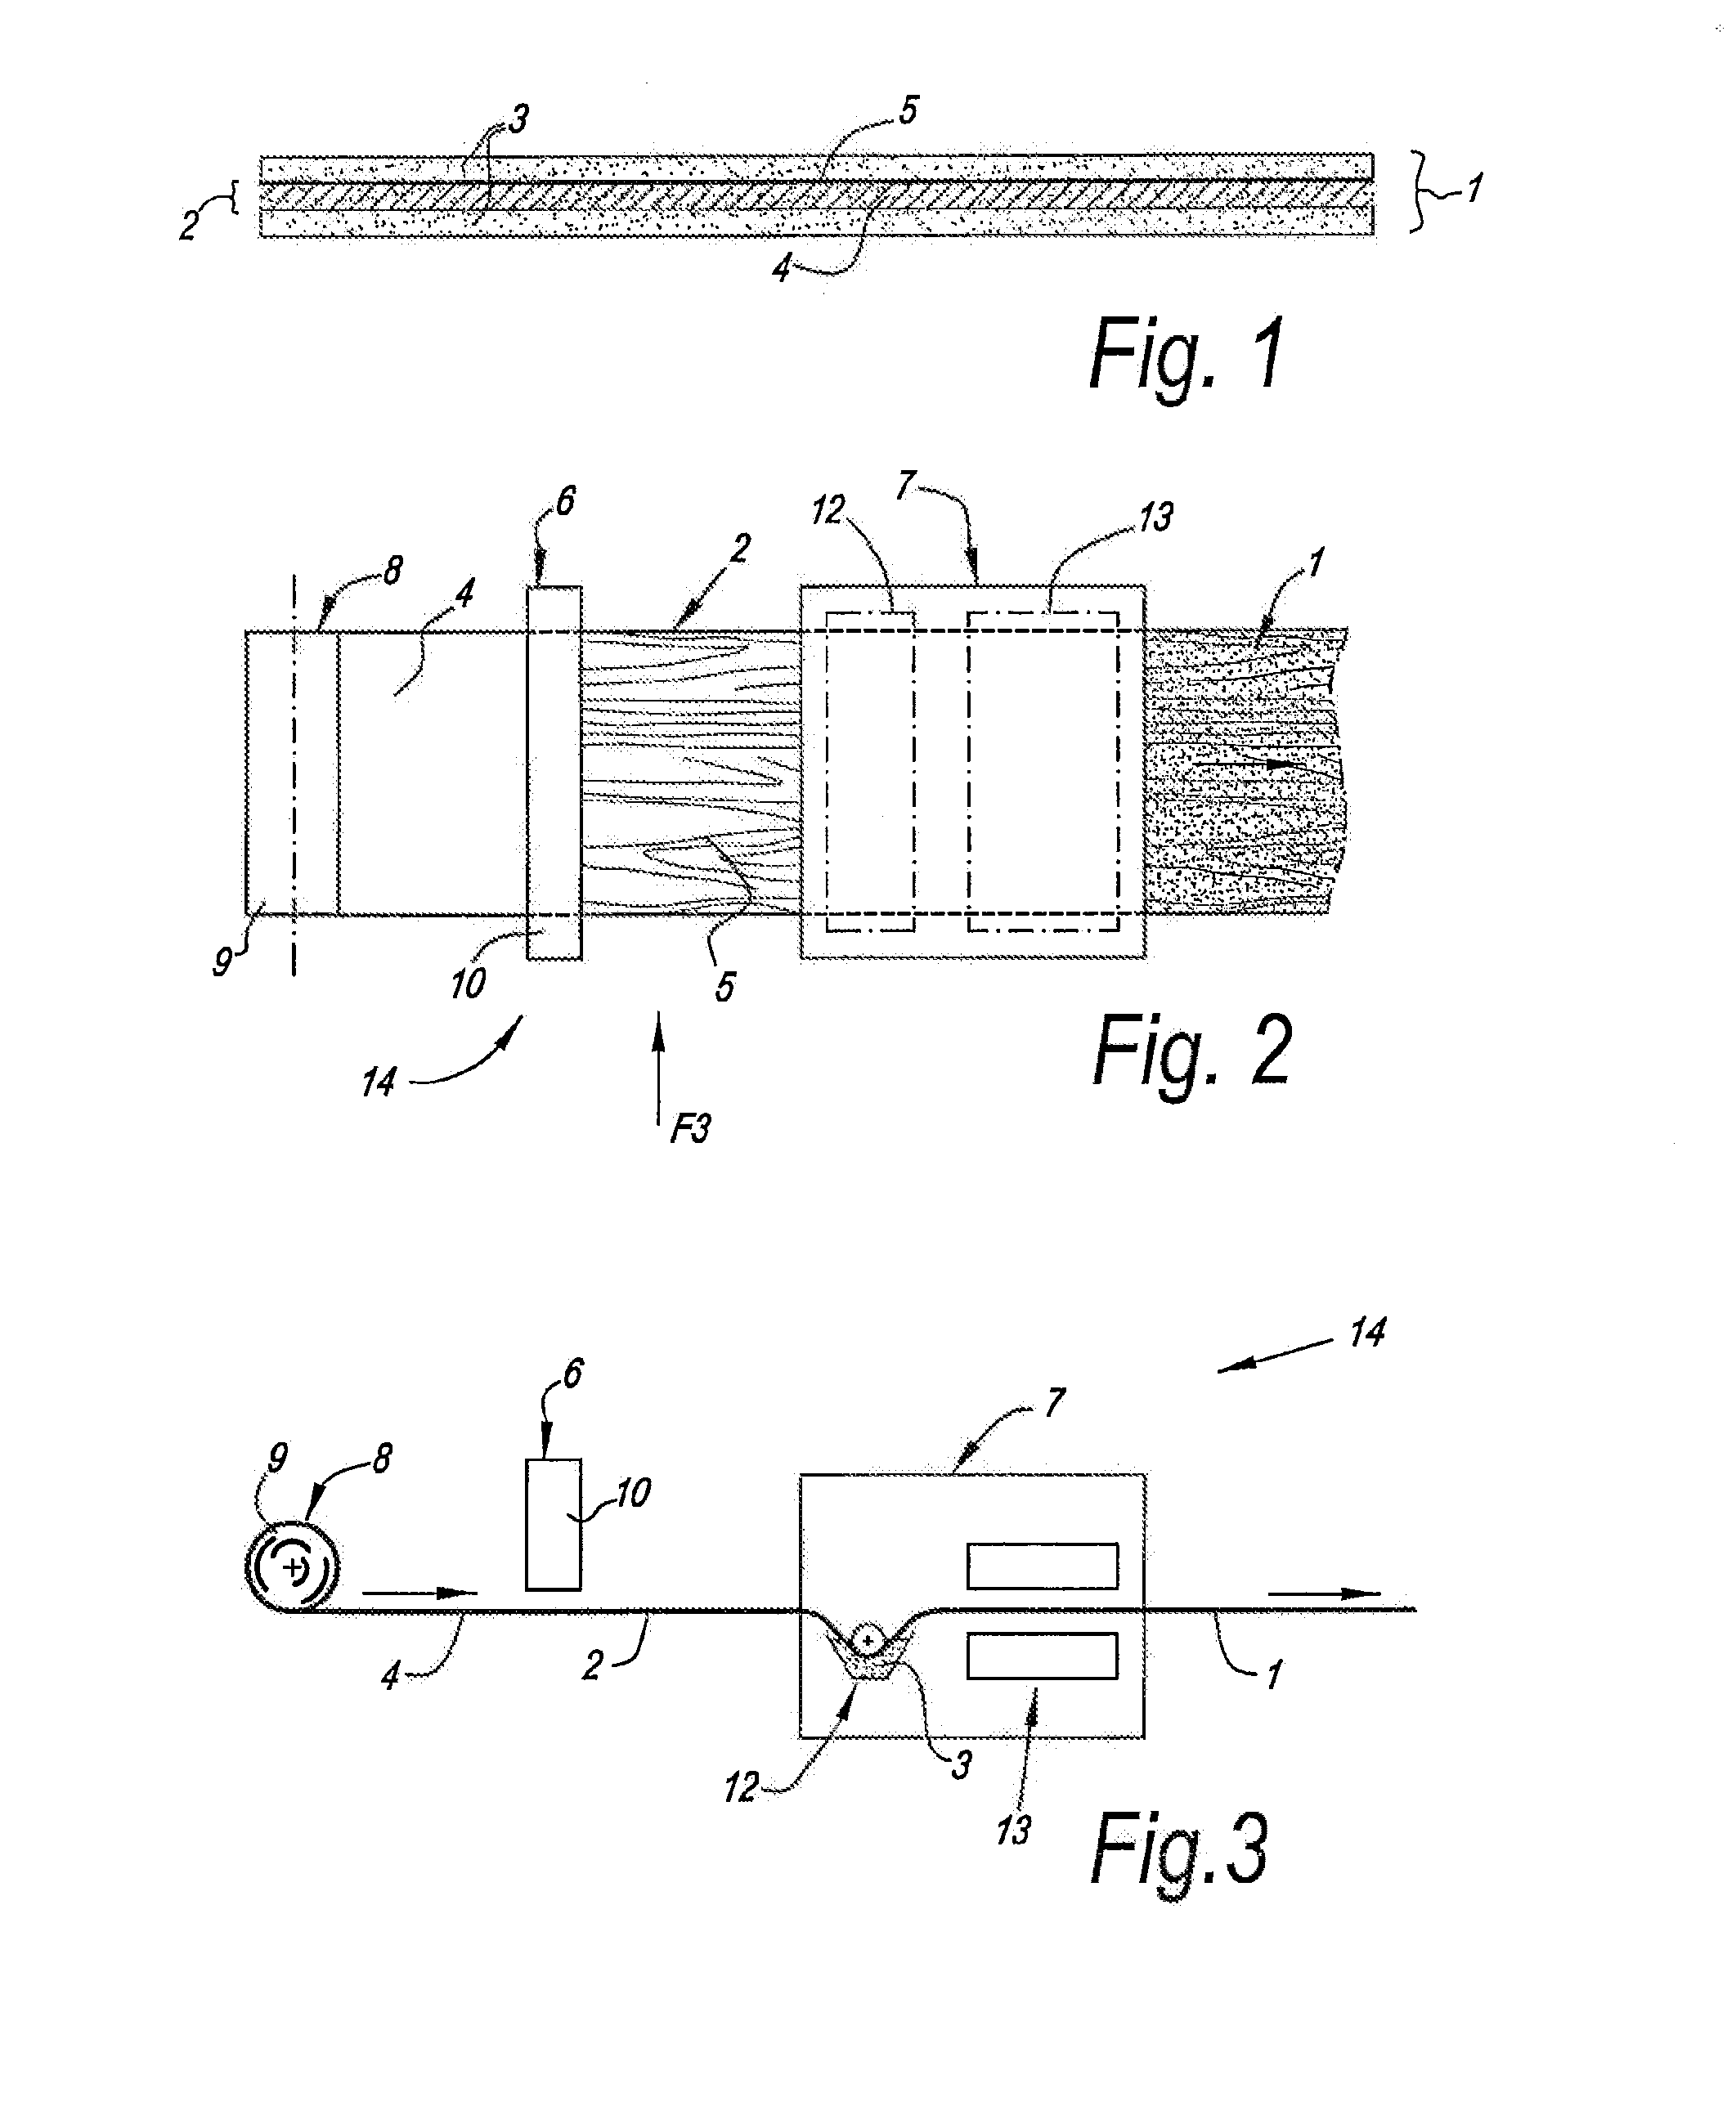 Method for Manufacturing a Laminate Product, Laminate Products Obtained Thereby and Device for Realizing the Method